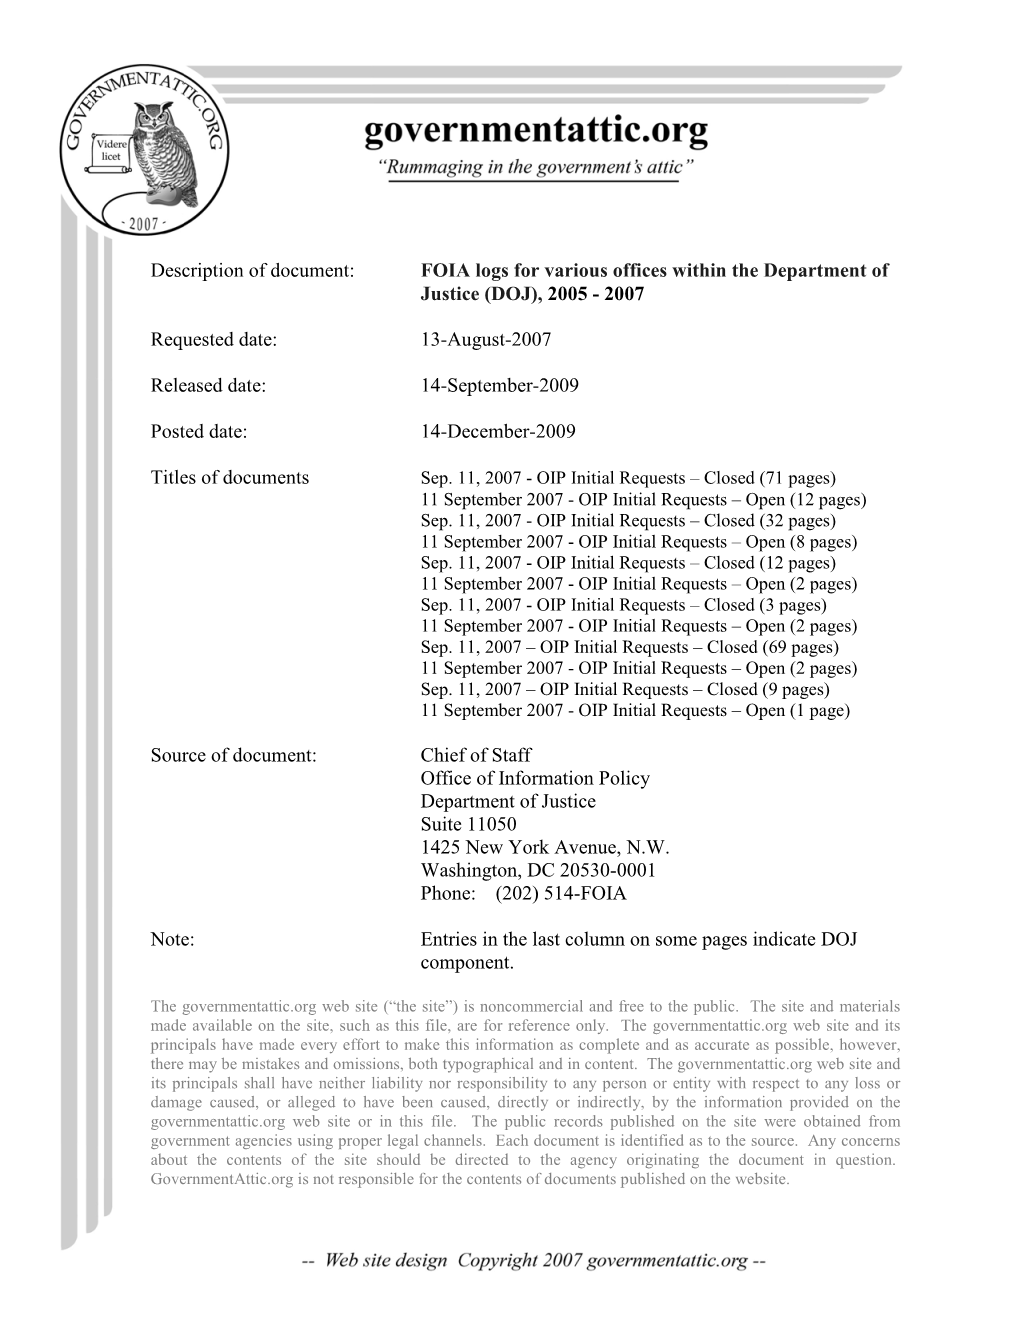 FOIA Logs for Various Offices Within the Department of Justice, 2005